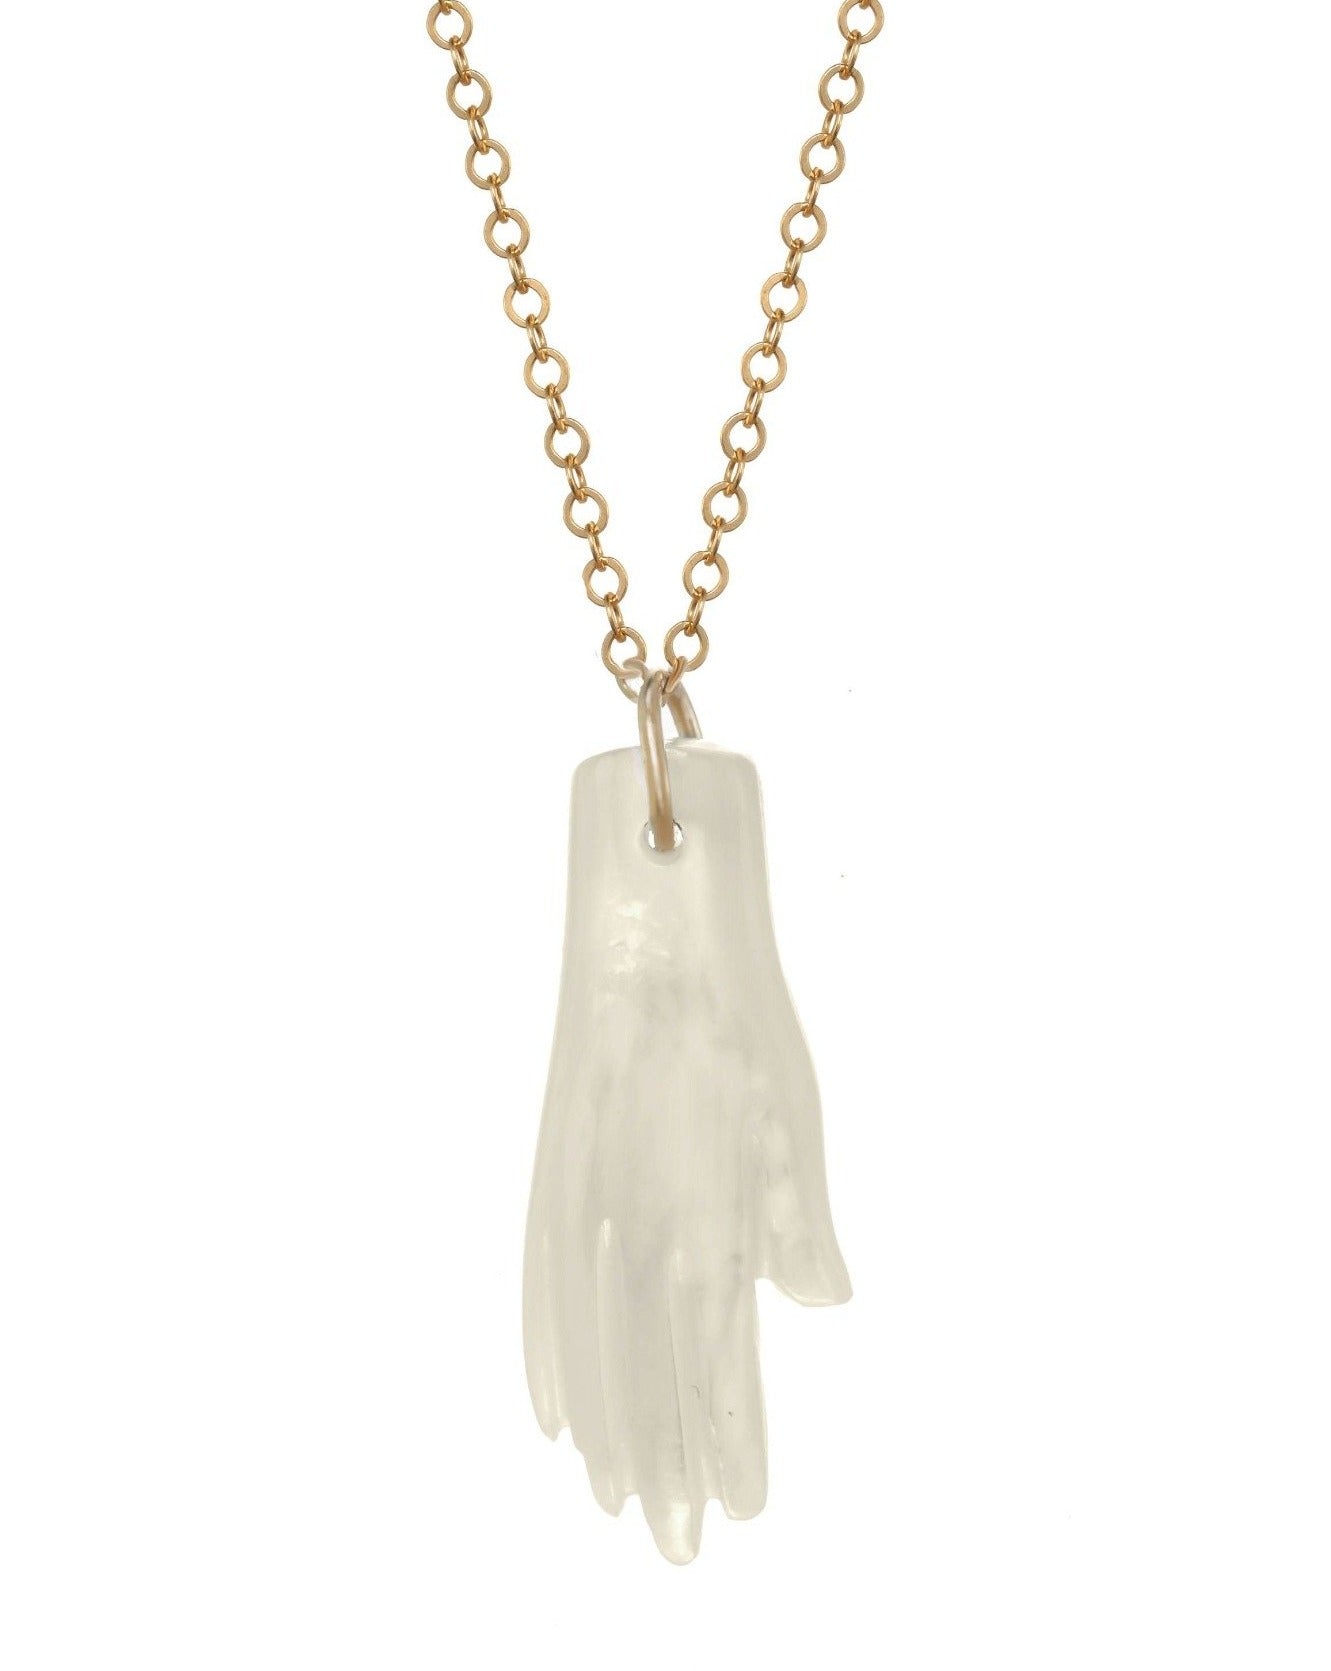 Hana Necklace by KOZAKH. A 16 to 18 inch adjustable length necklace in 14K Gold Filled, featuring a hand-carved Mother of Pearl hand charm.